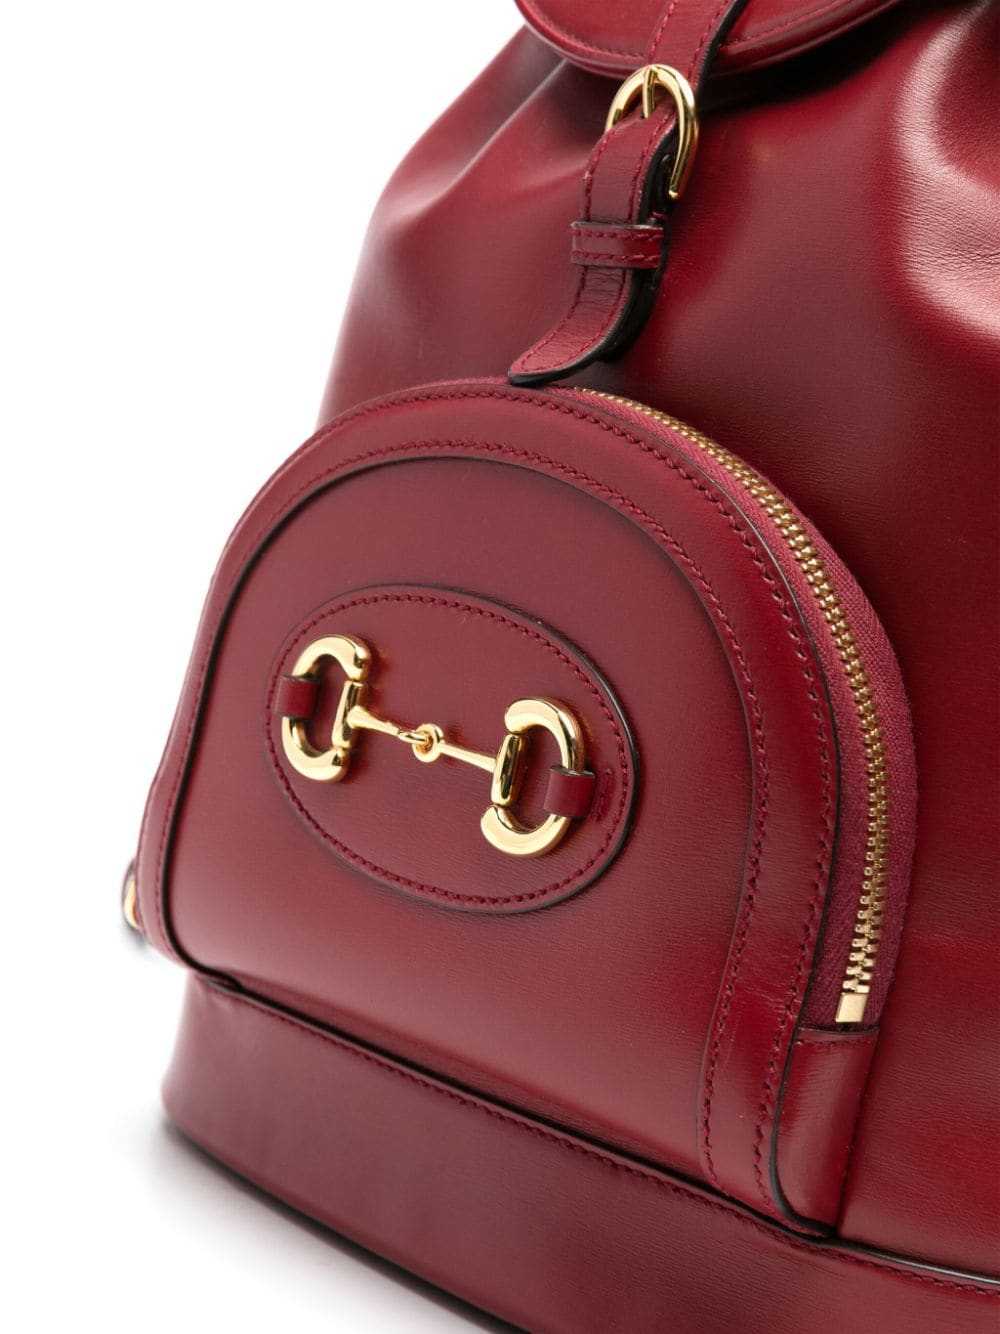 Gucci Pre-Owned Horsebit 1955 backpack - Red - image 4